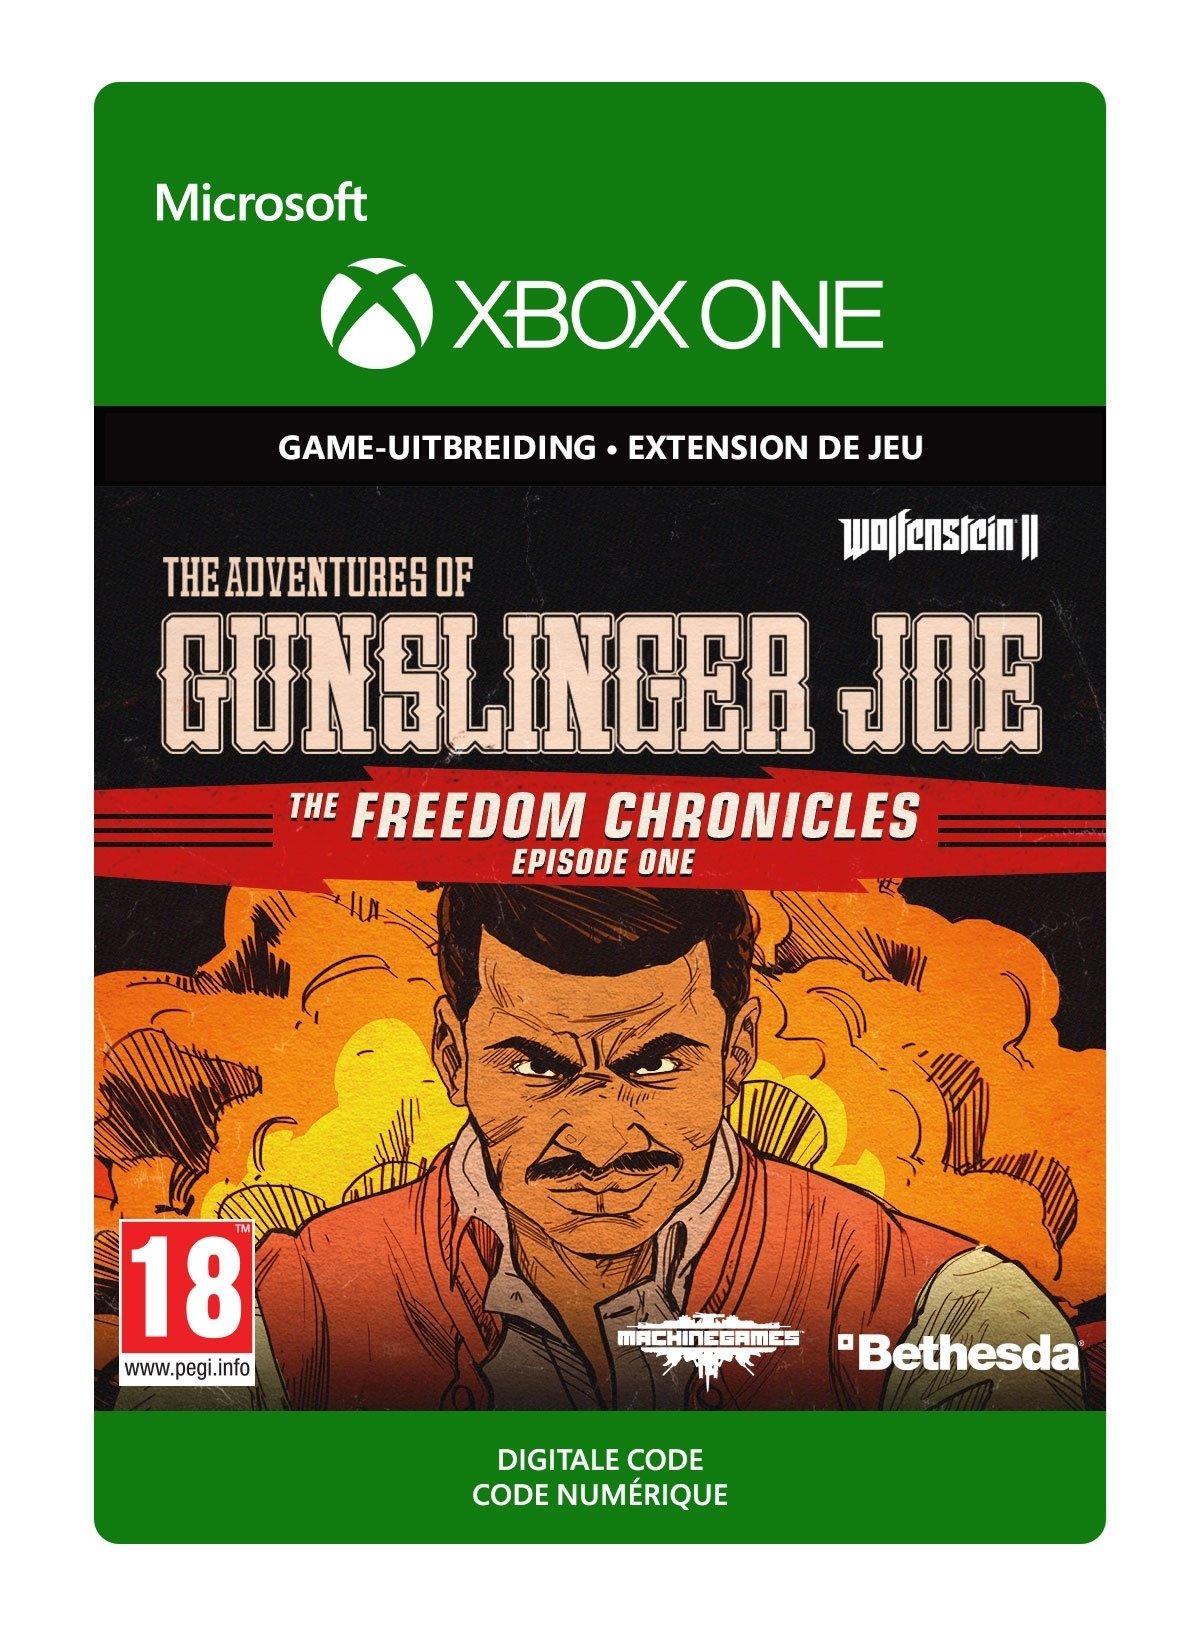 Wolfenstein II: The New Colossus: The Adventures of Gunslinger Joe - Xbox One - Add-on | 7D4-00264 (cb54f3ac-1ed6-4887-9e67-3a8159422142)